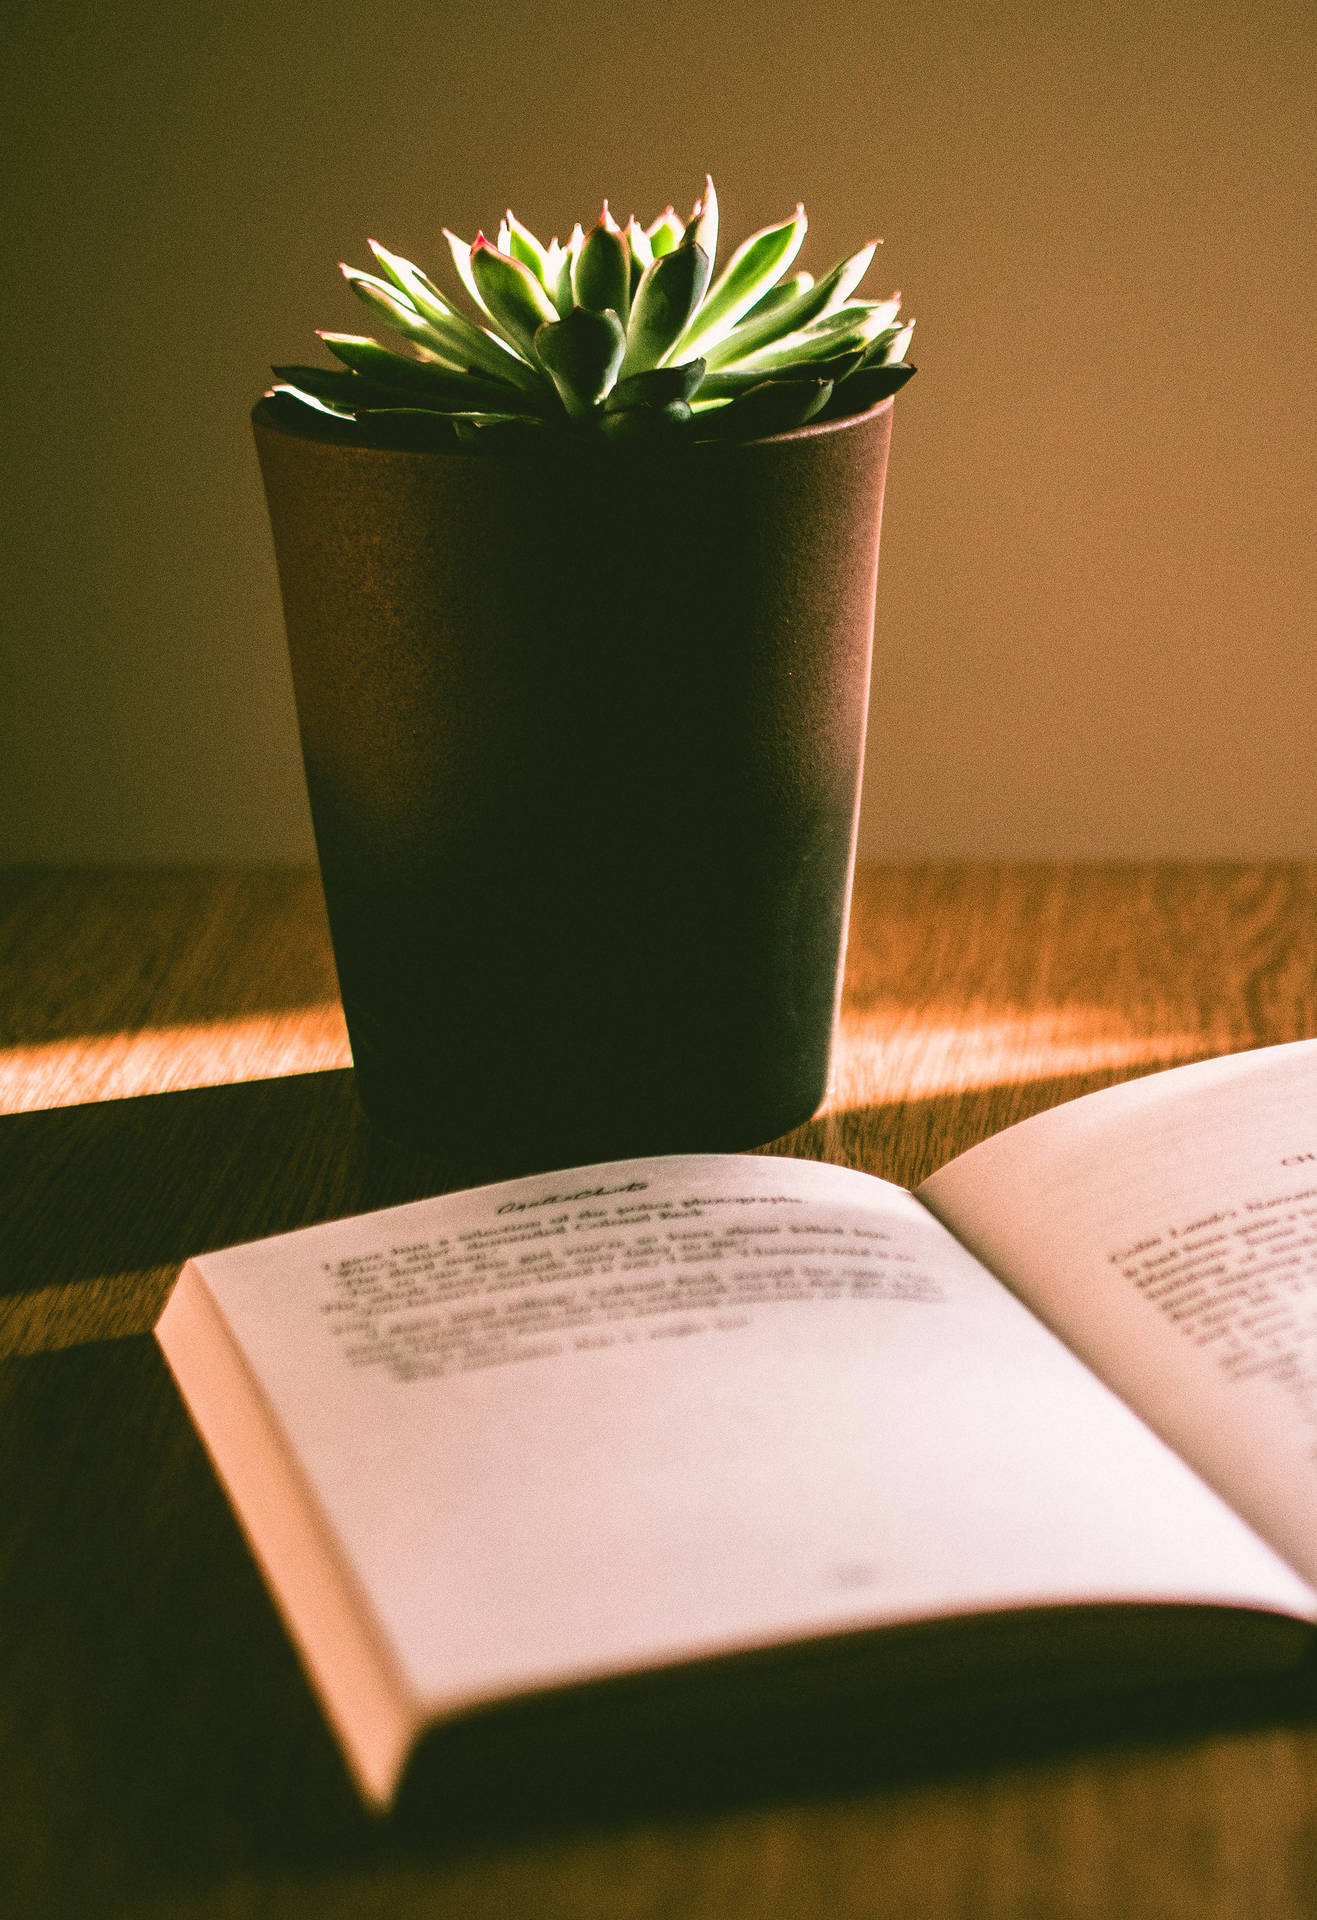 Study Motivation Book And Potted Plant Background